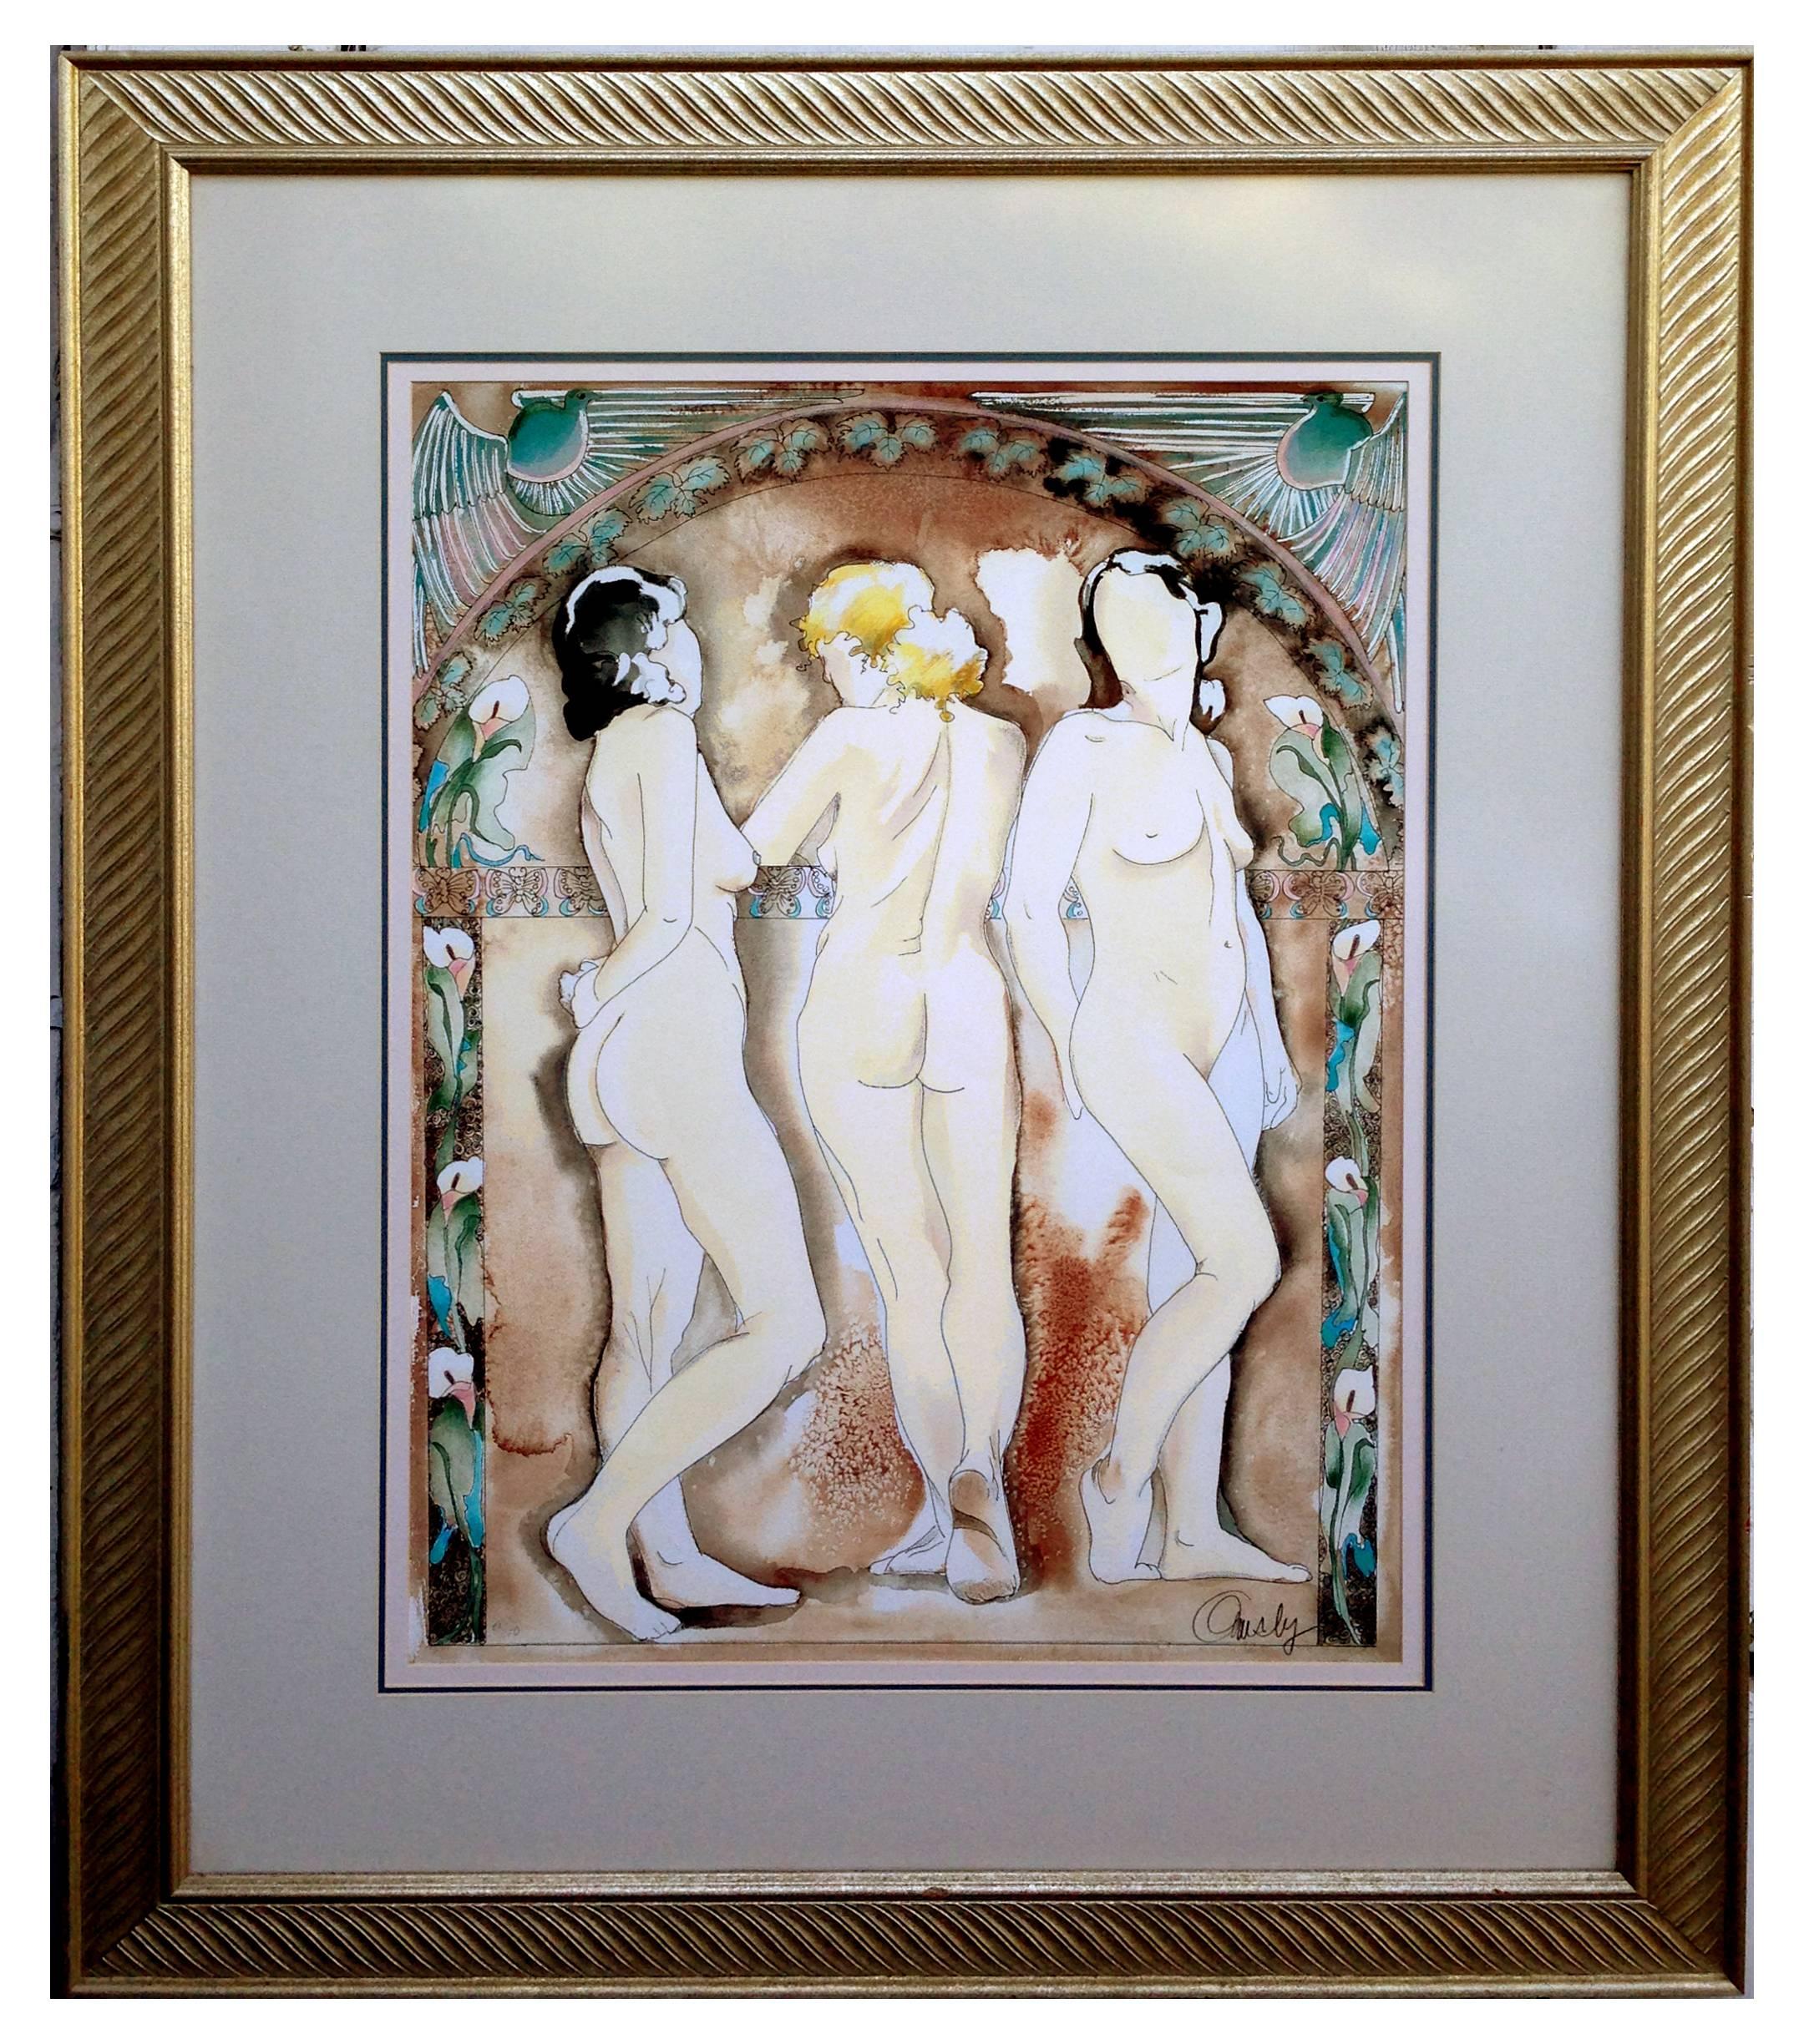 Anne Ormsby Figurative Print – „The Aunties“ – Figurative abstrakter Druck in limitierter Auflage, 20/100